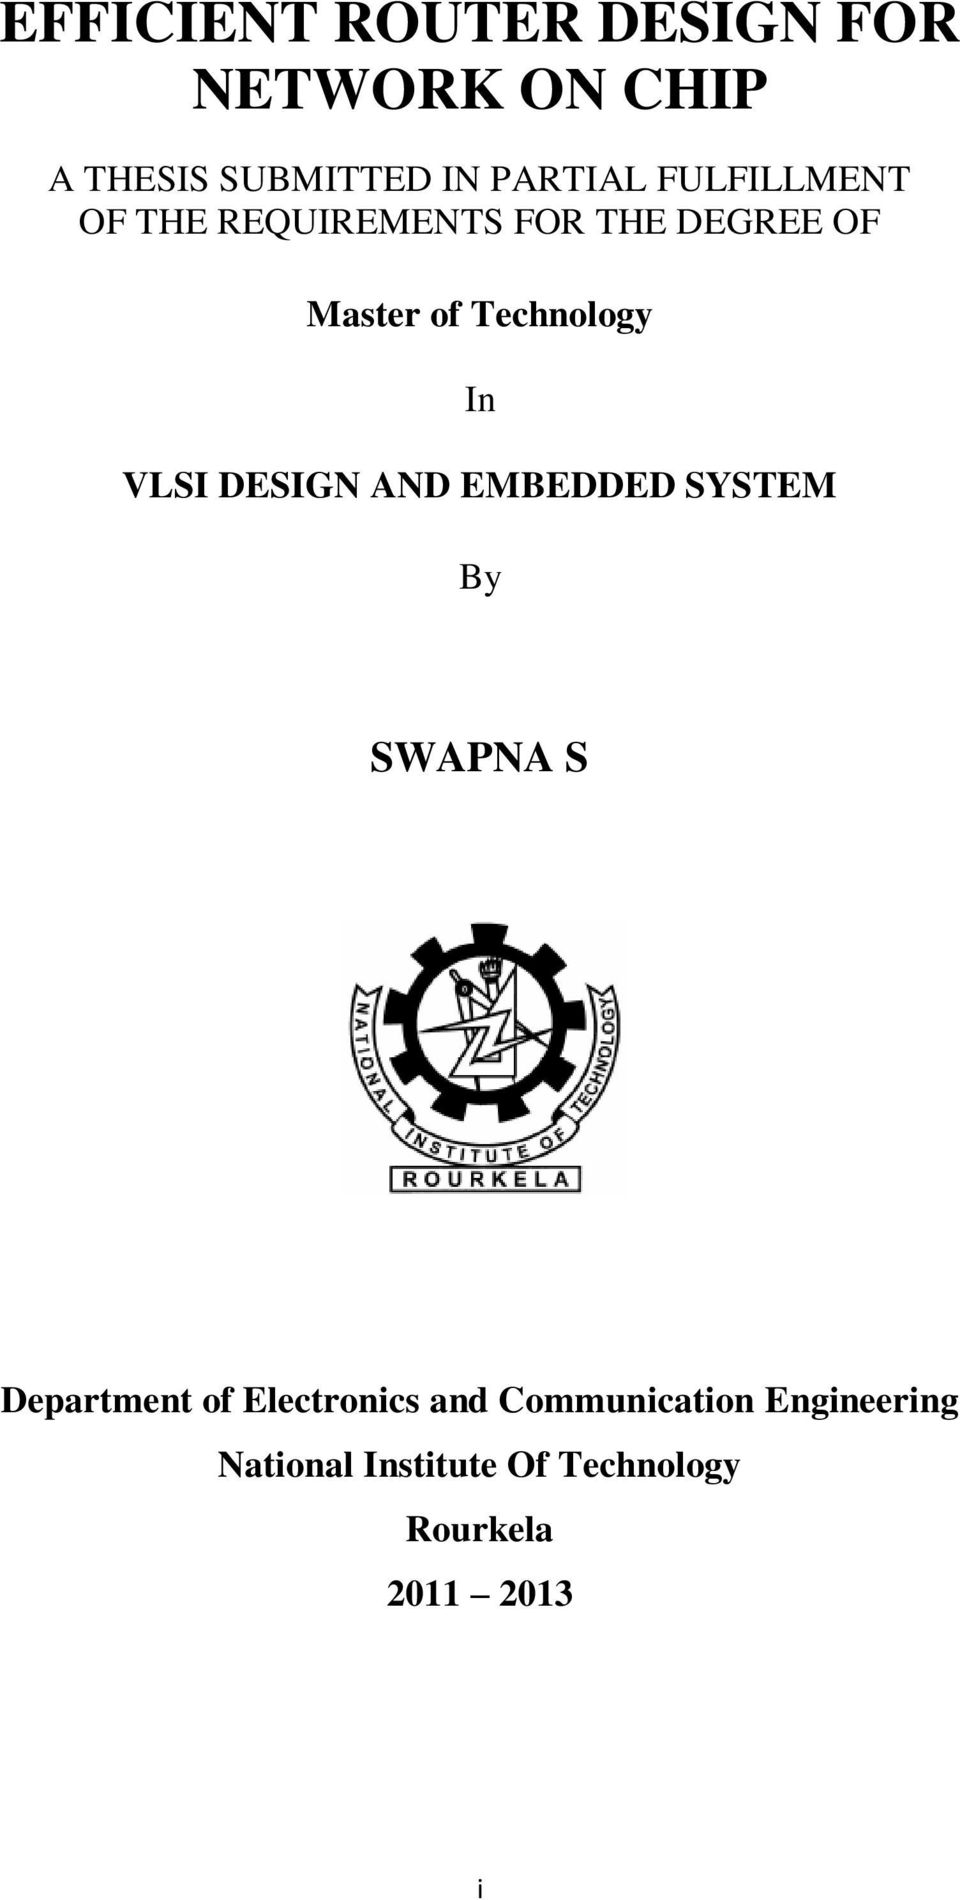 VLSI DESIGN AND EMBEDDED SYSTEM By SWAPNA S Department of Electronics and